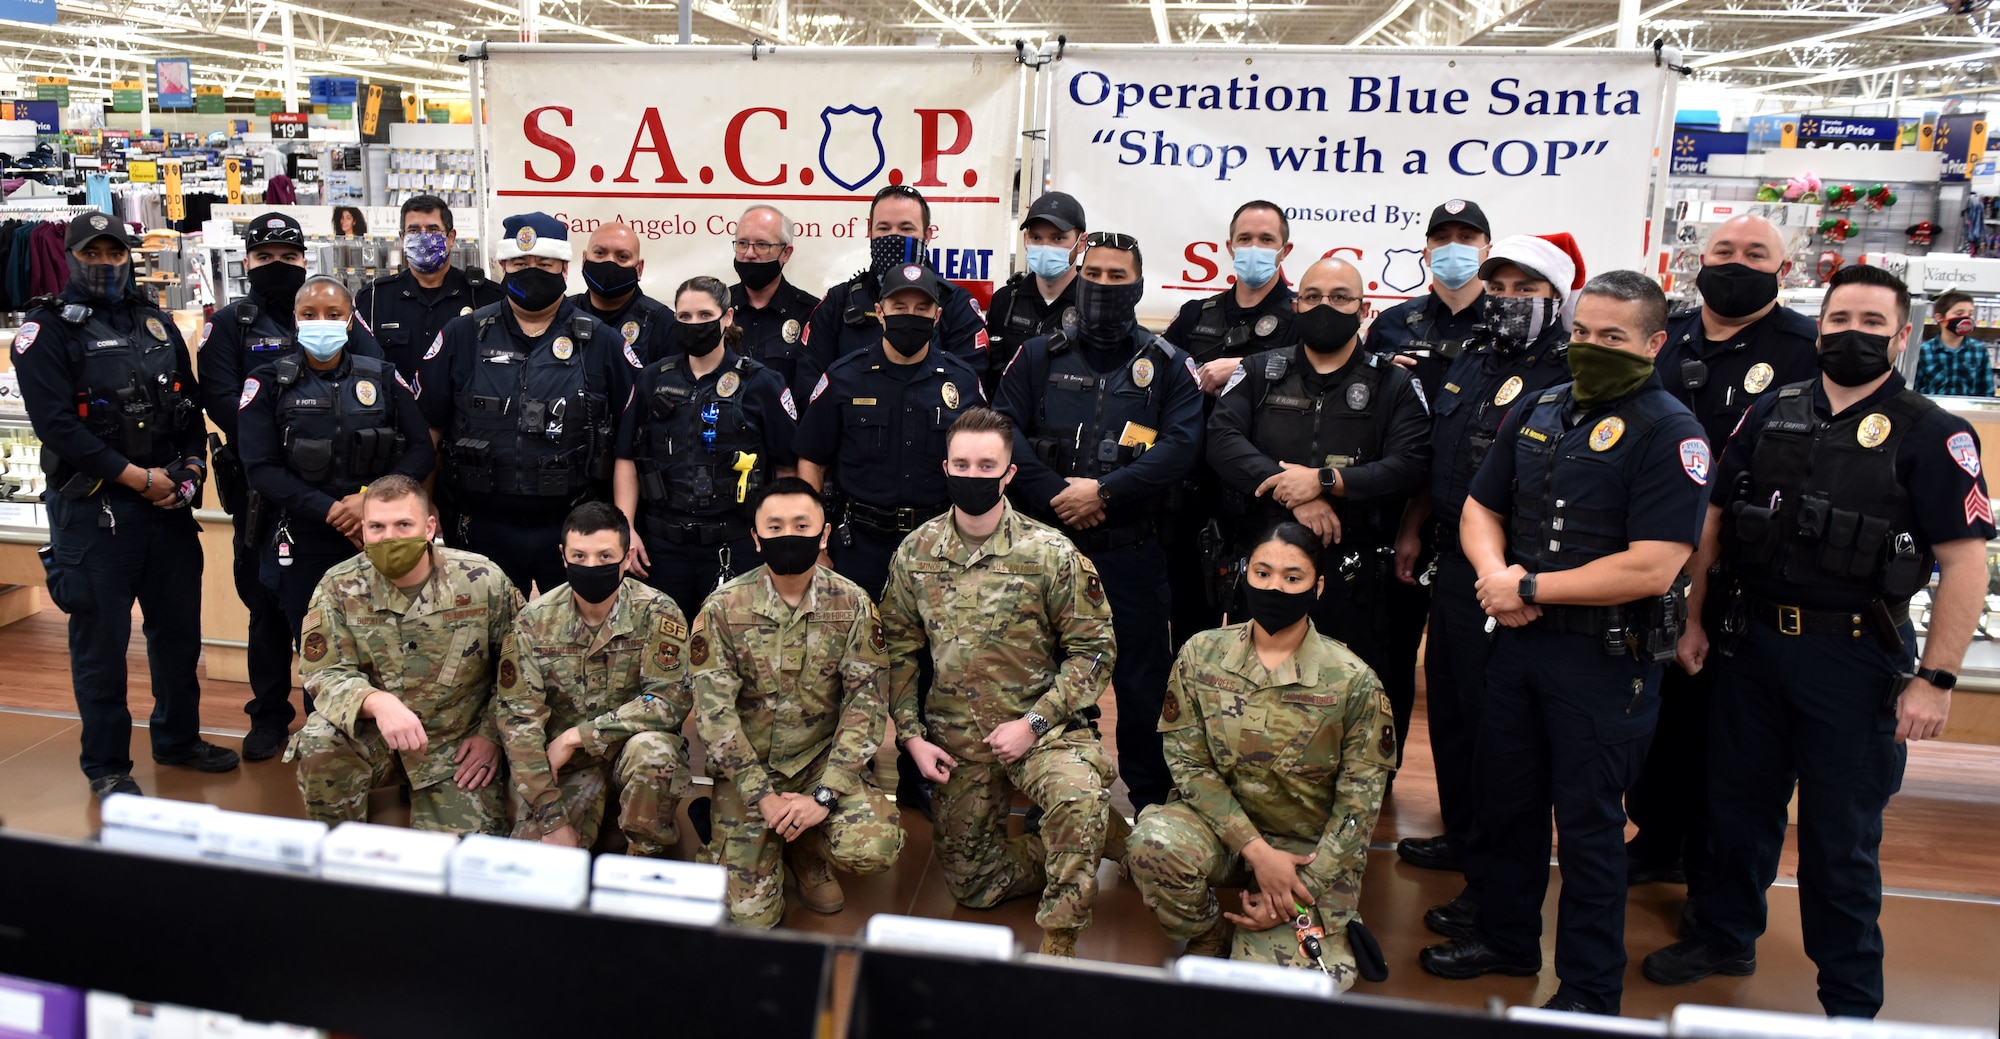 Police officers and Goodfellow members pose together before taking participants shopping at the 13th Annual Operation Blue Santa event in San Angelo, Texas, Dec. 12, 2020. This was the second year that Goodfellow members volunteered with local police officers for the event. (U.S. Air Force photo by Staff Sgt. Seraiah Wolf)